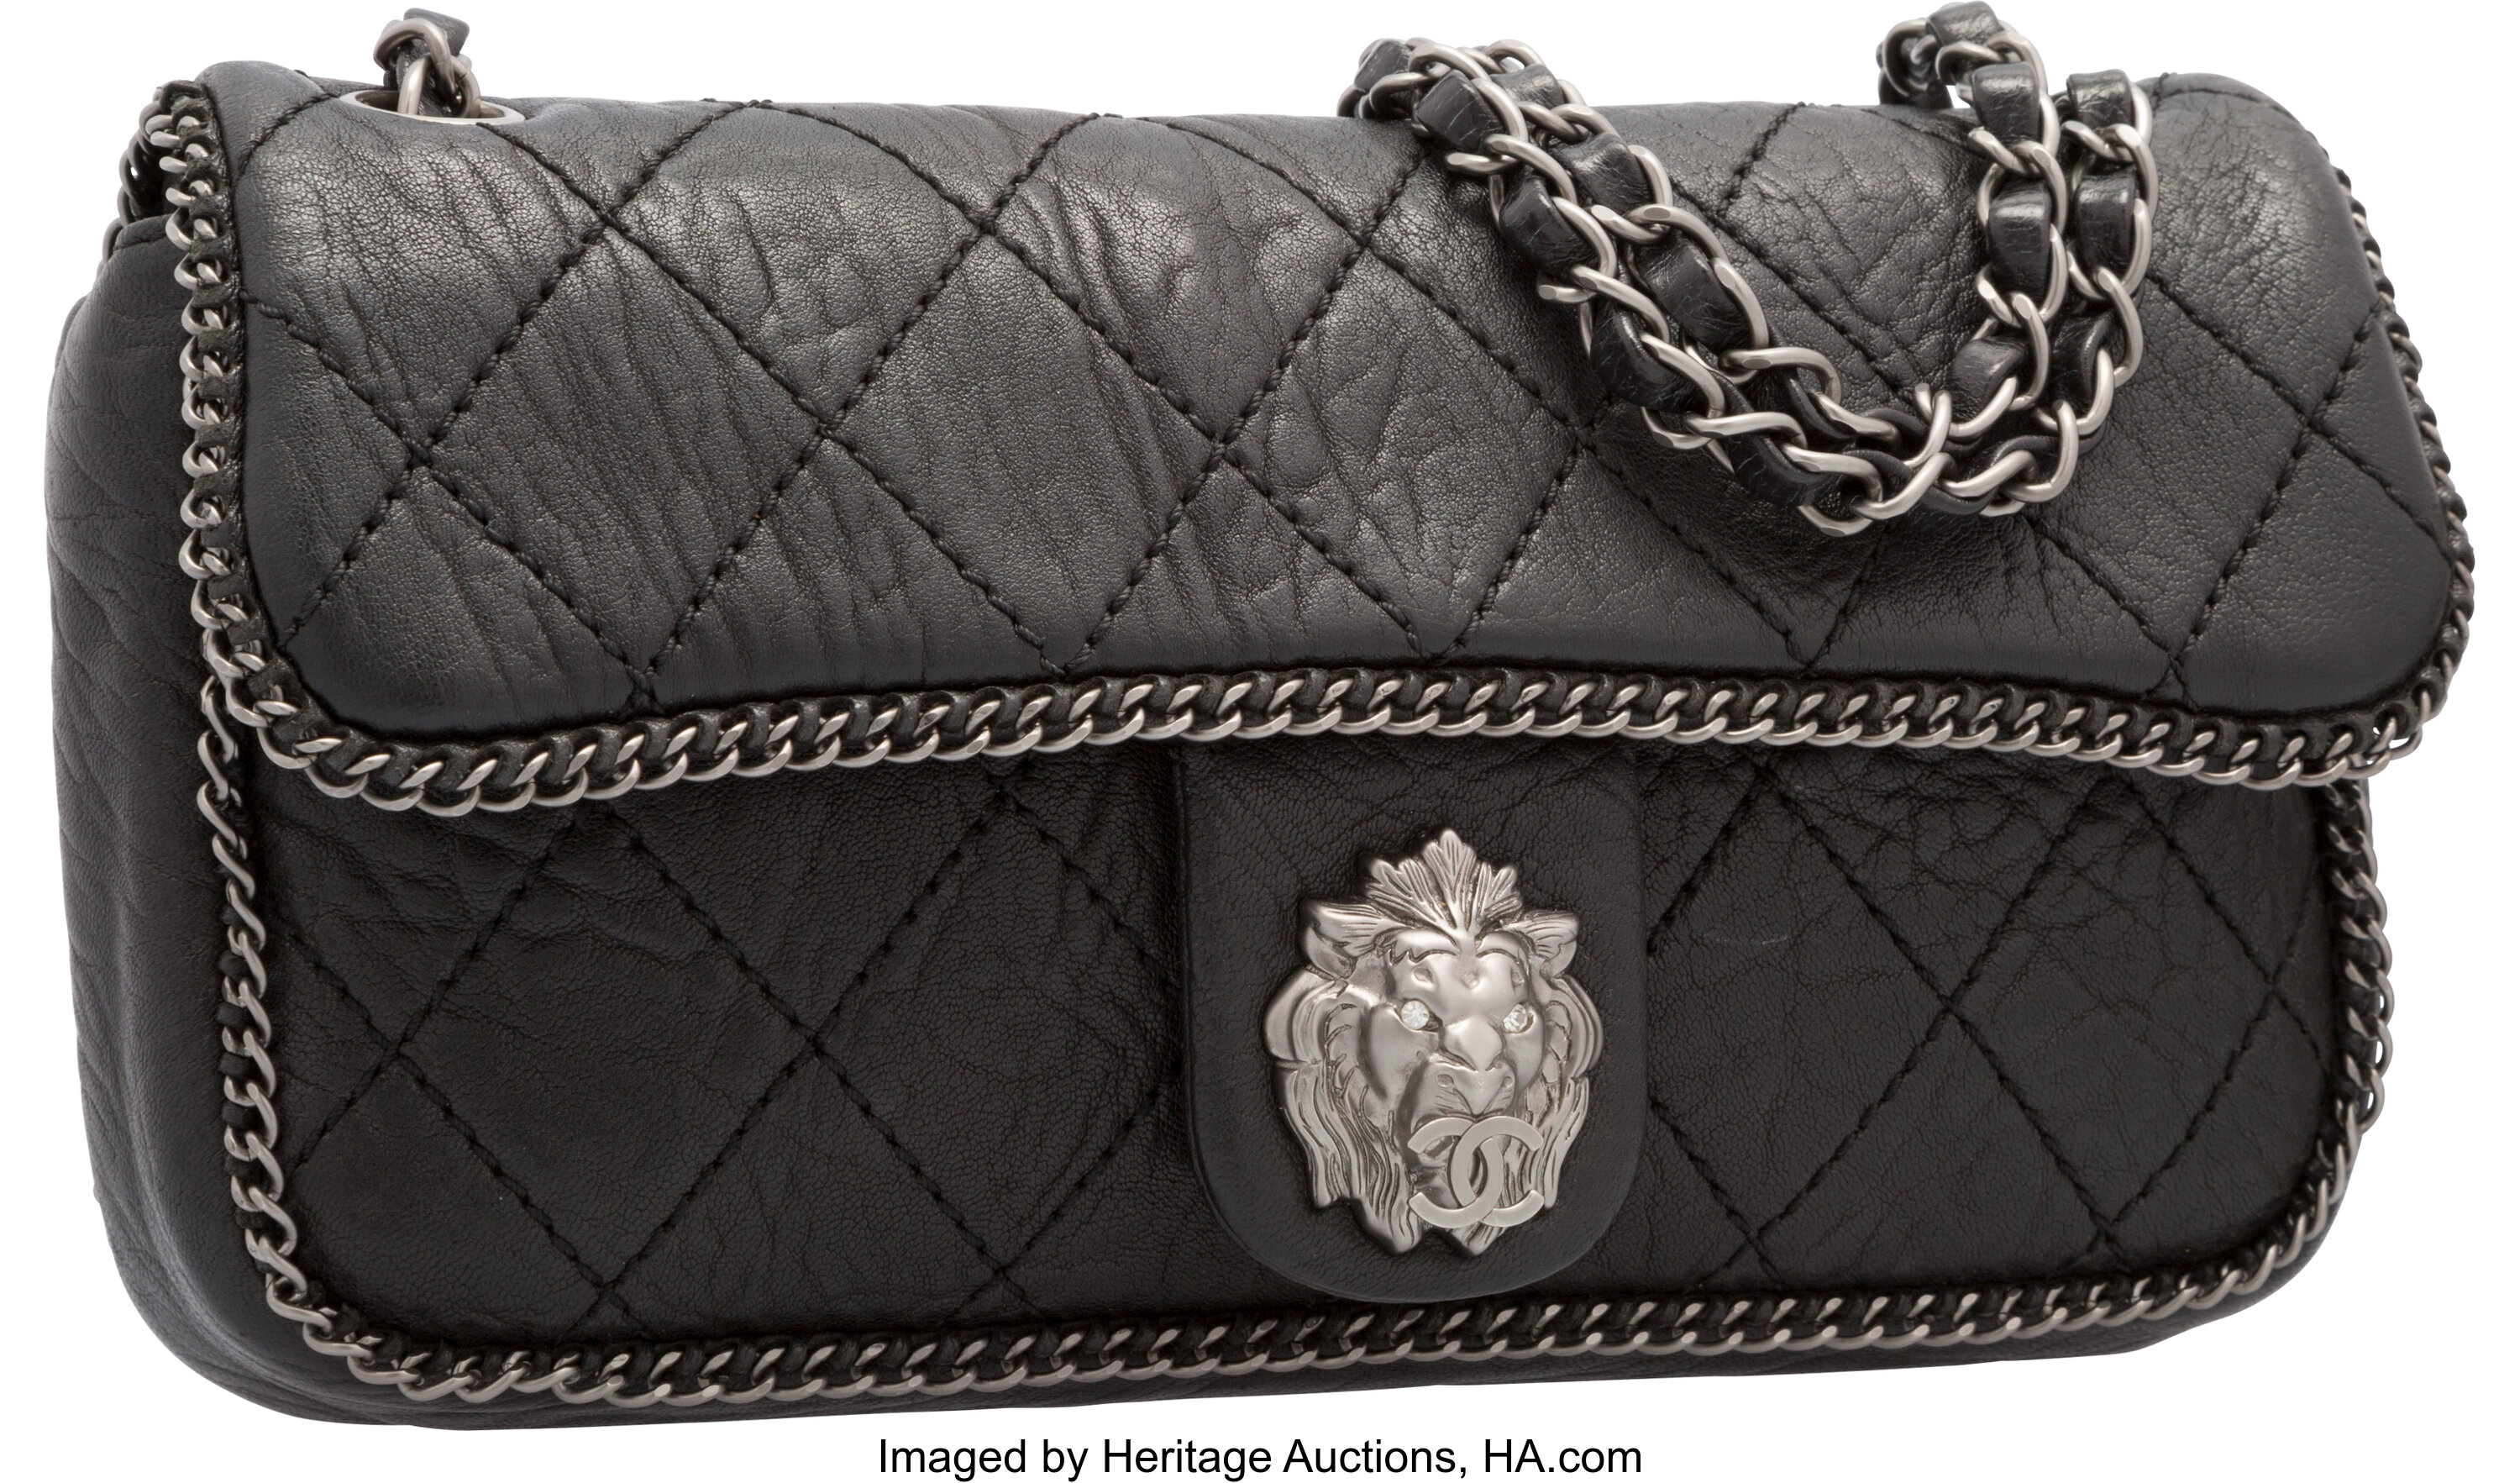 Chanel Limited Edition Paris-Moscow Black Quilted Leather Flap Bag ...